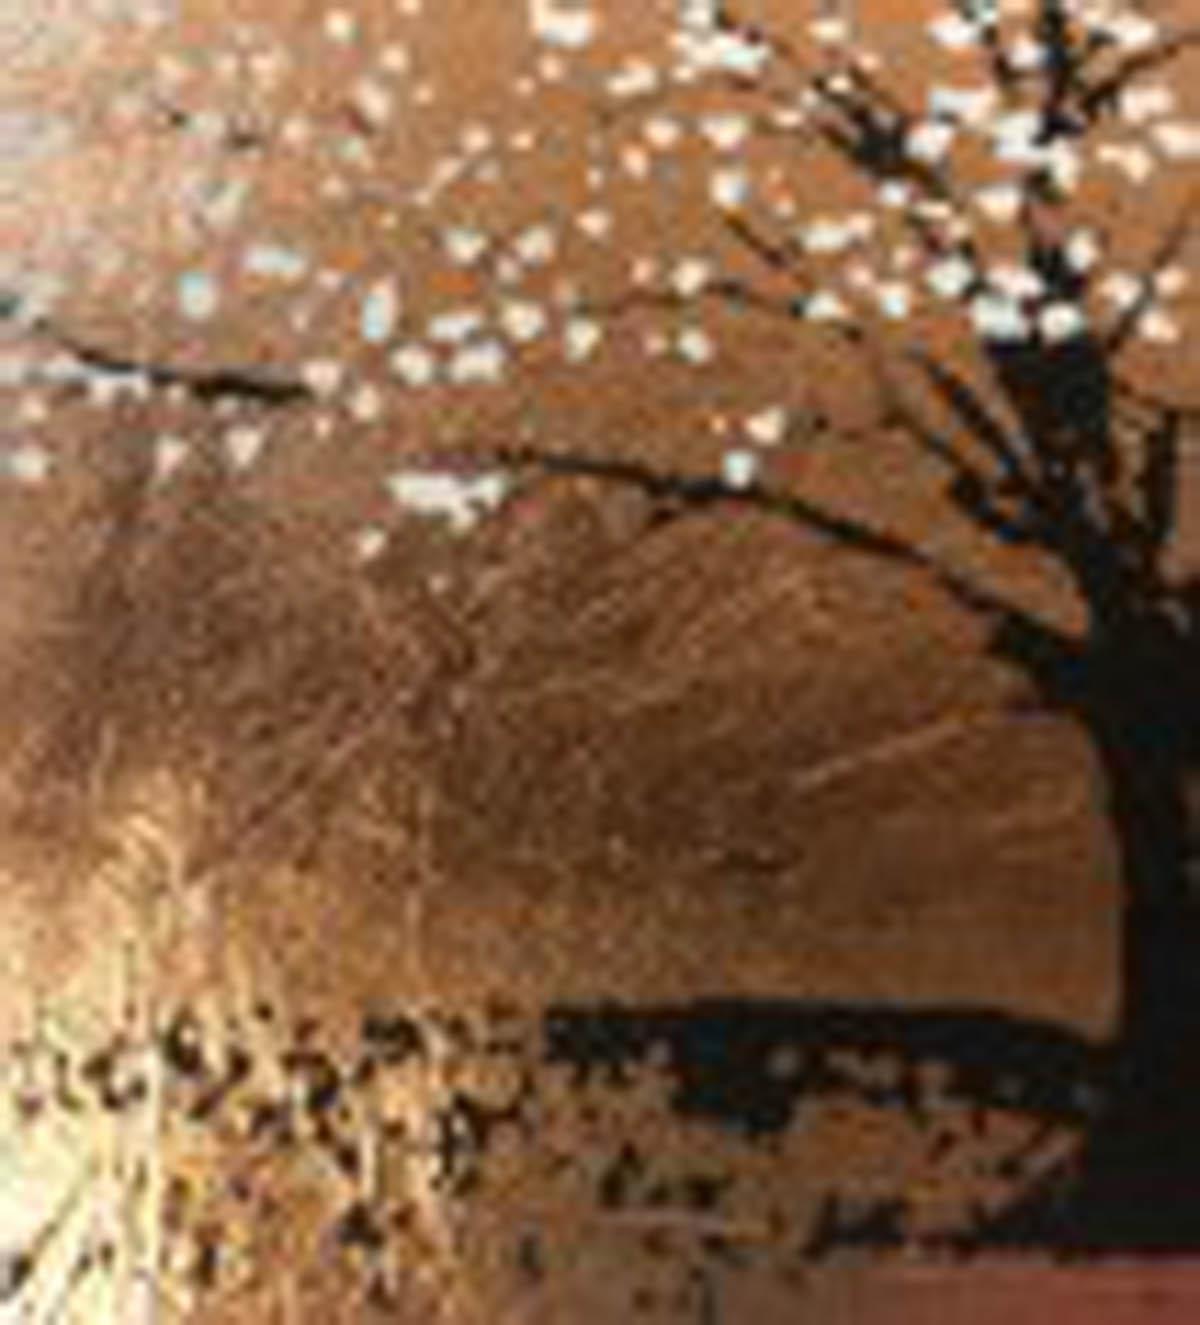 Copper Seasons, Katie Edwards
Limited Edition Original Silkscreen Print of 10
Signed by the artist
Mounted Size: H 56cm x W 71cm
Image size: H 37cm x W 51.5cm

Copper Seasons’Original Handmade Silk Screen Print of Trees on Copper Leaf

Copper